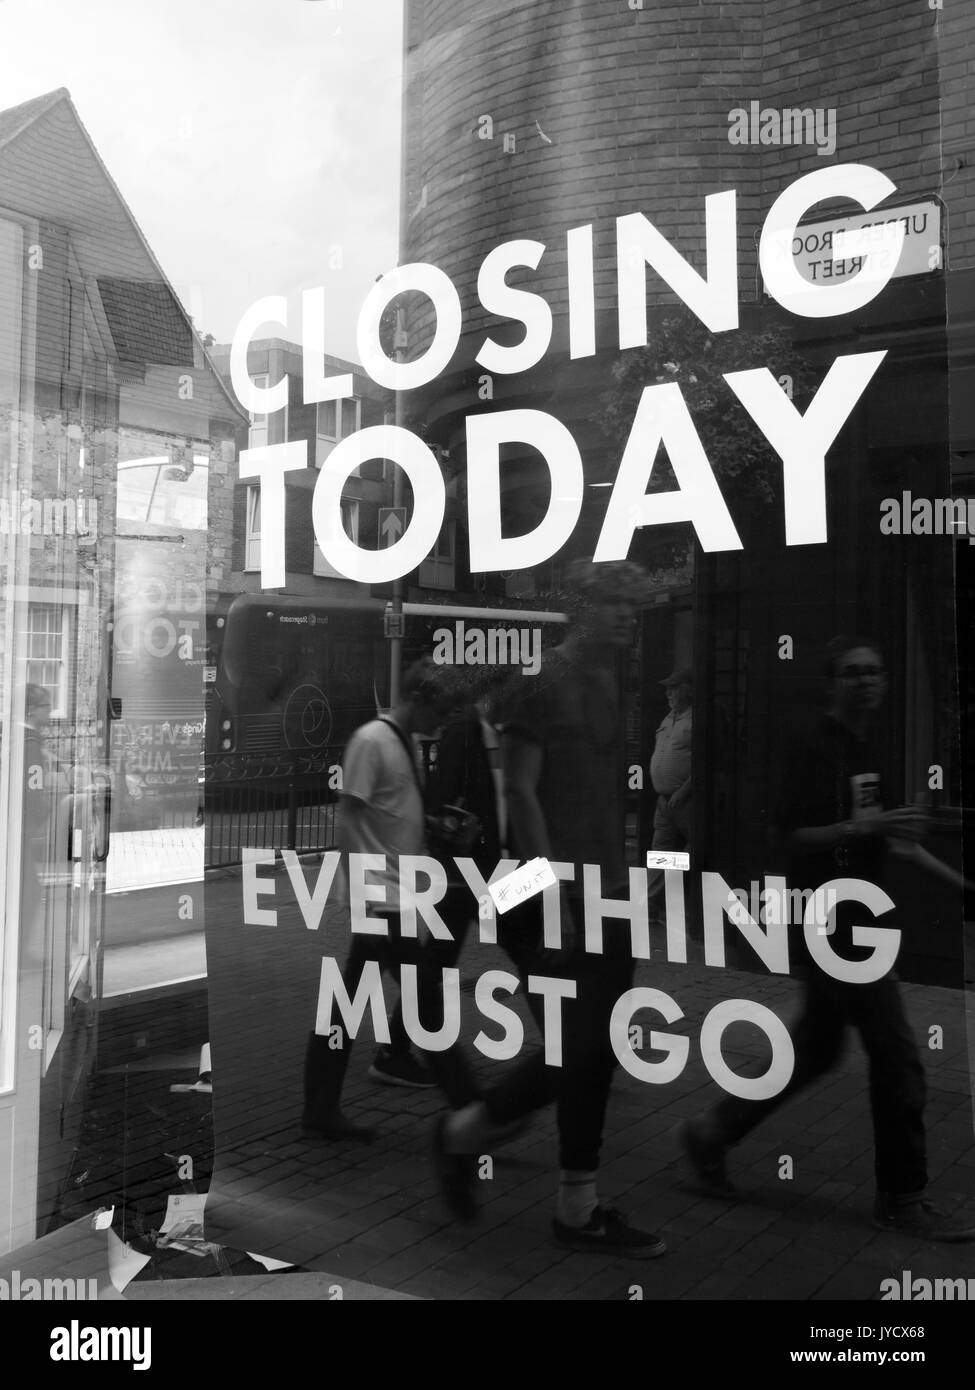 Closing today everything must go and sale posters in retail shop window Stock Photo